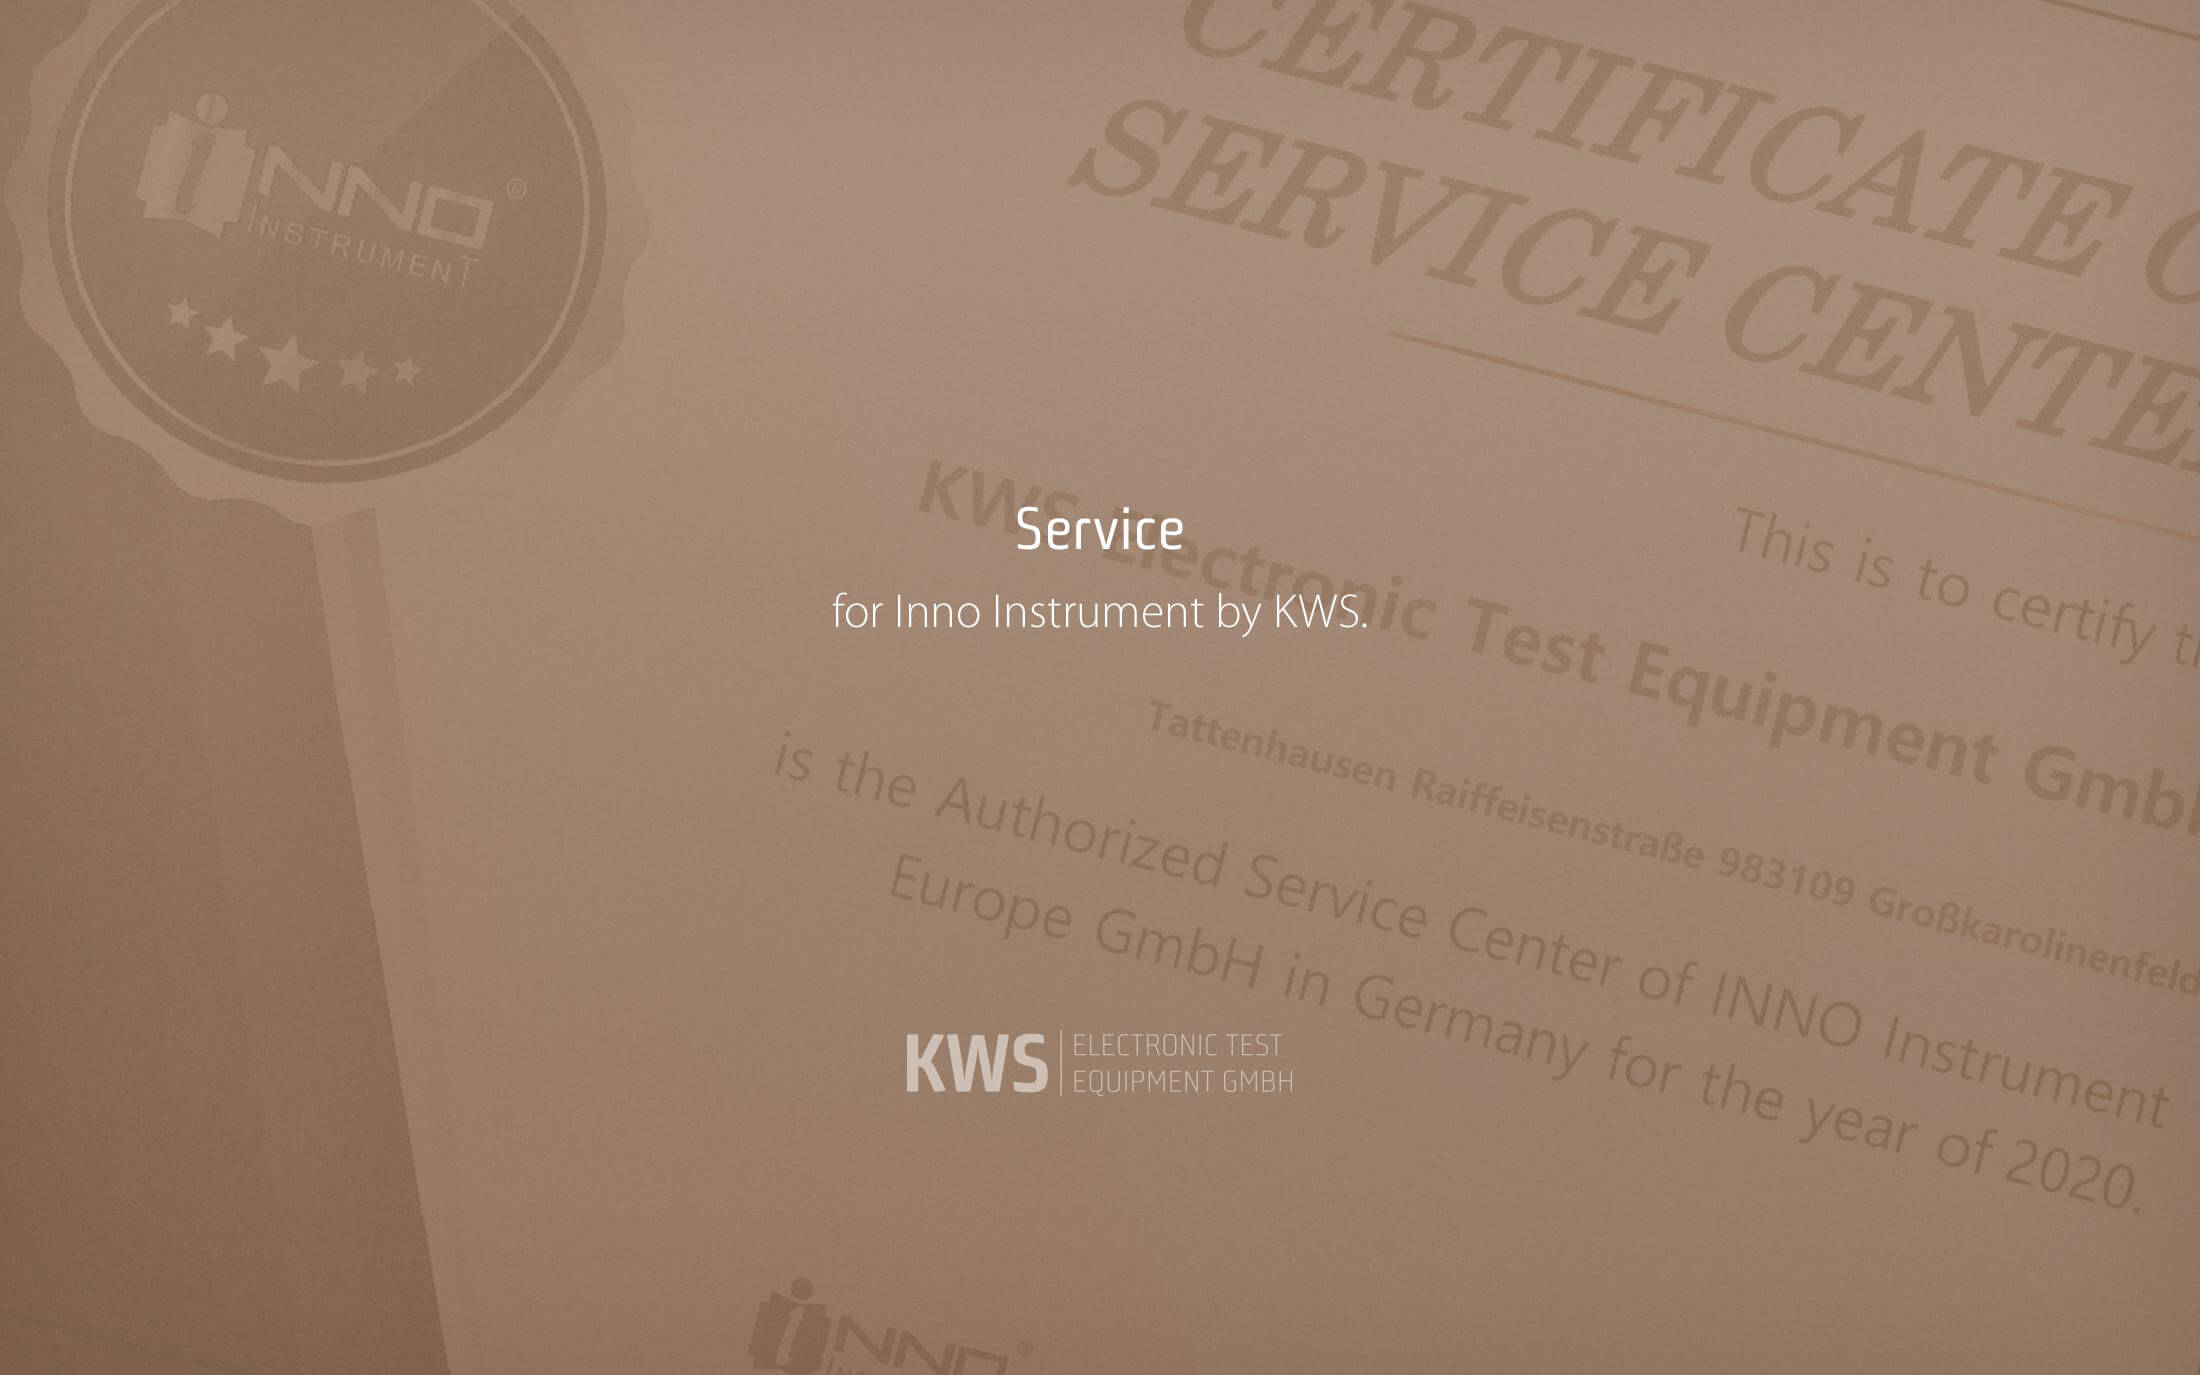 KWS Electronic News 2020: Service for INNO by KWS